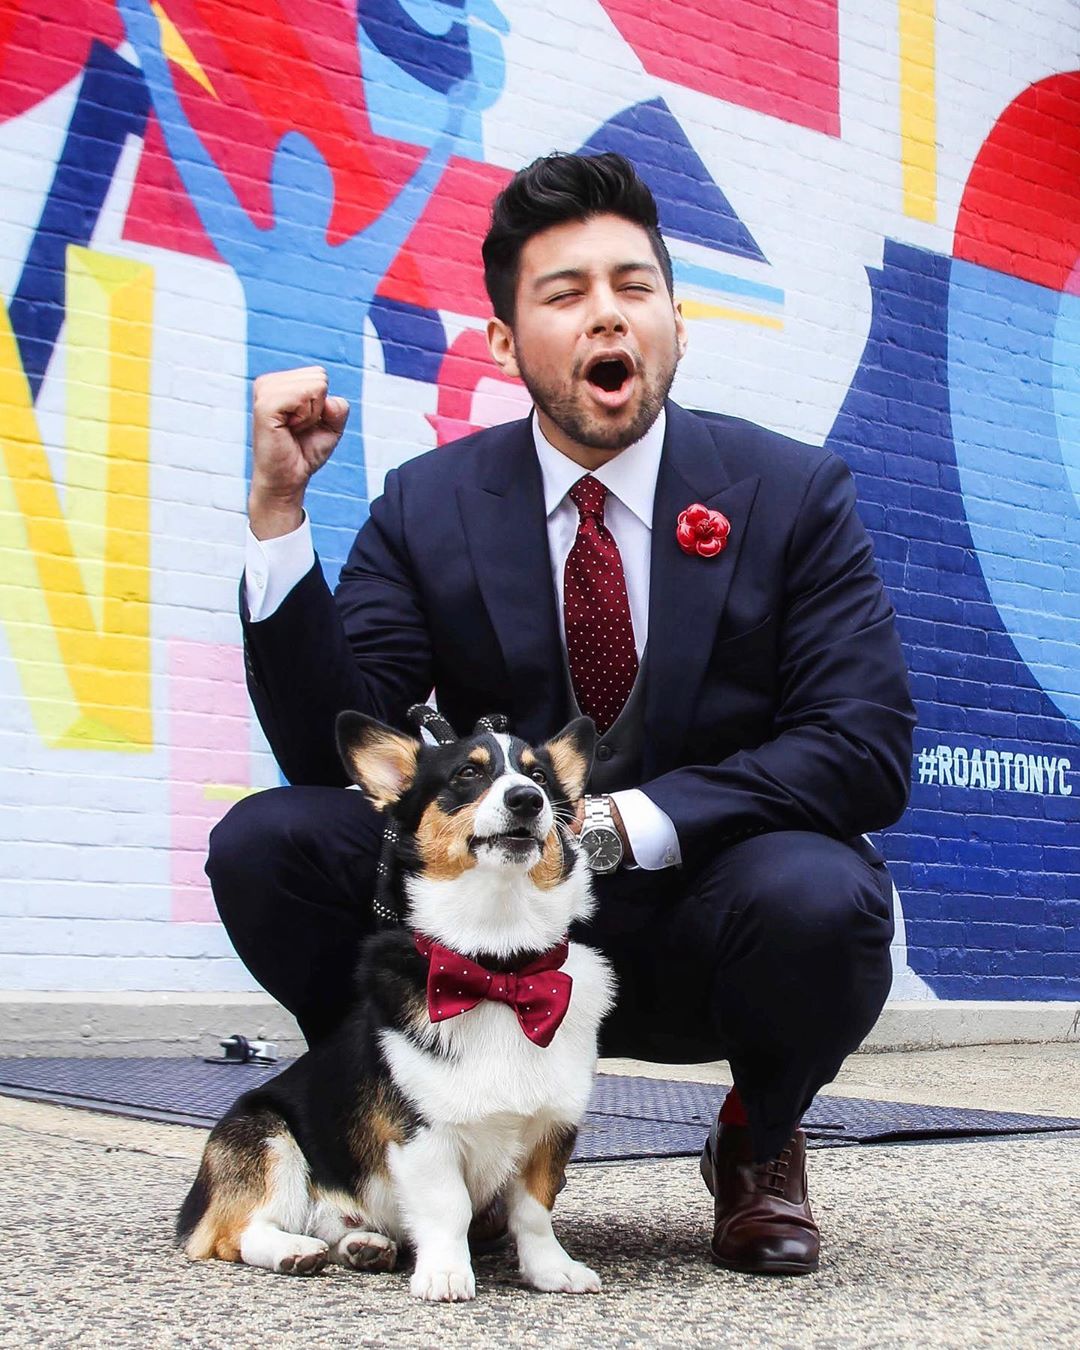 Cuddie The Dog - Puppy from the Bronx - Dog with a bow tie - dandy in the bronx